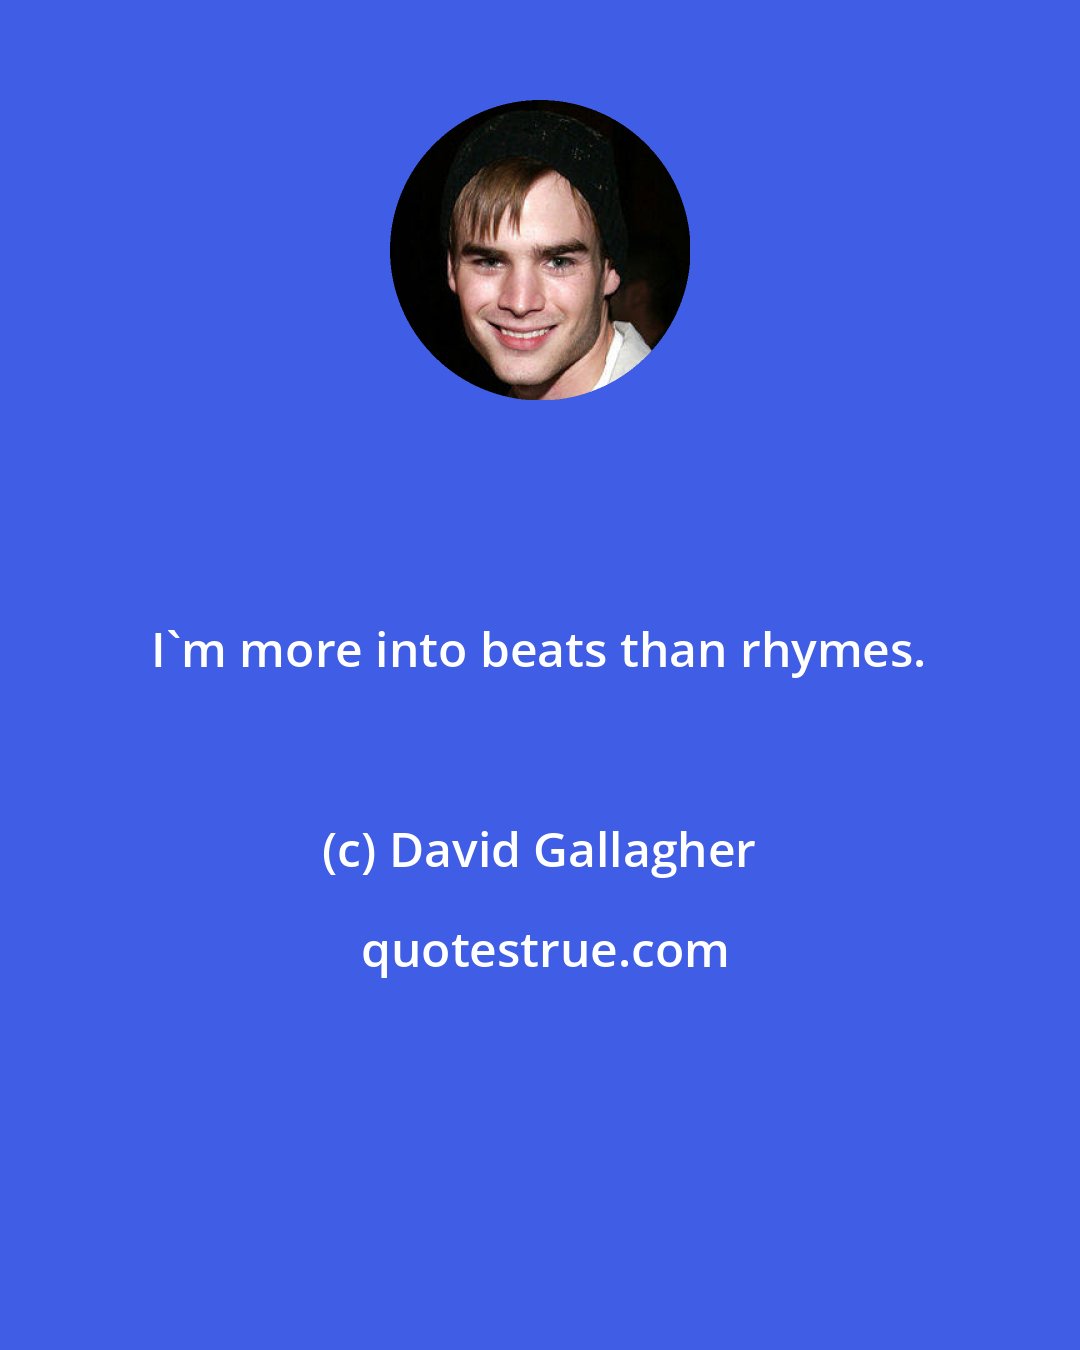 David Gallagher: I'm more into beats than rhymes.